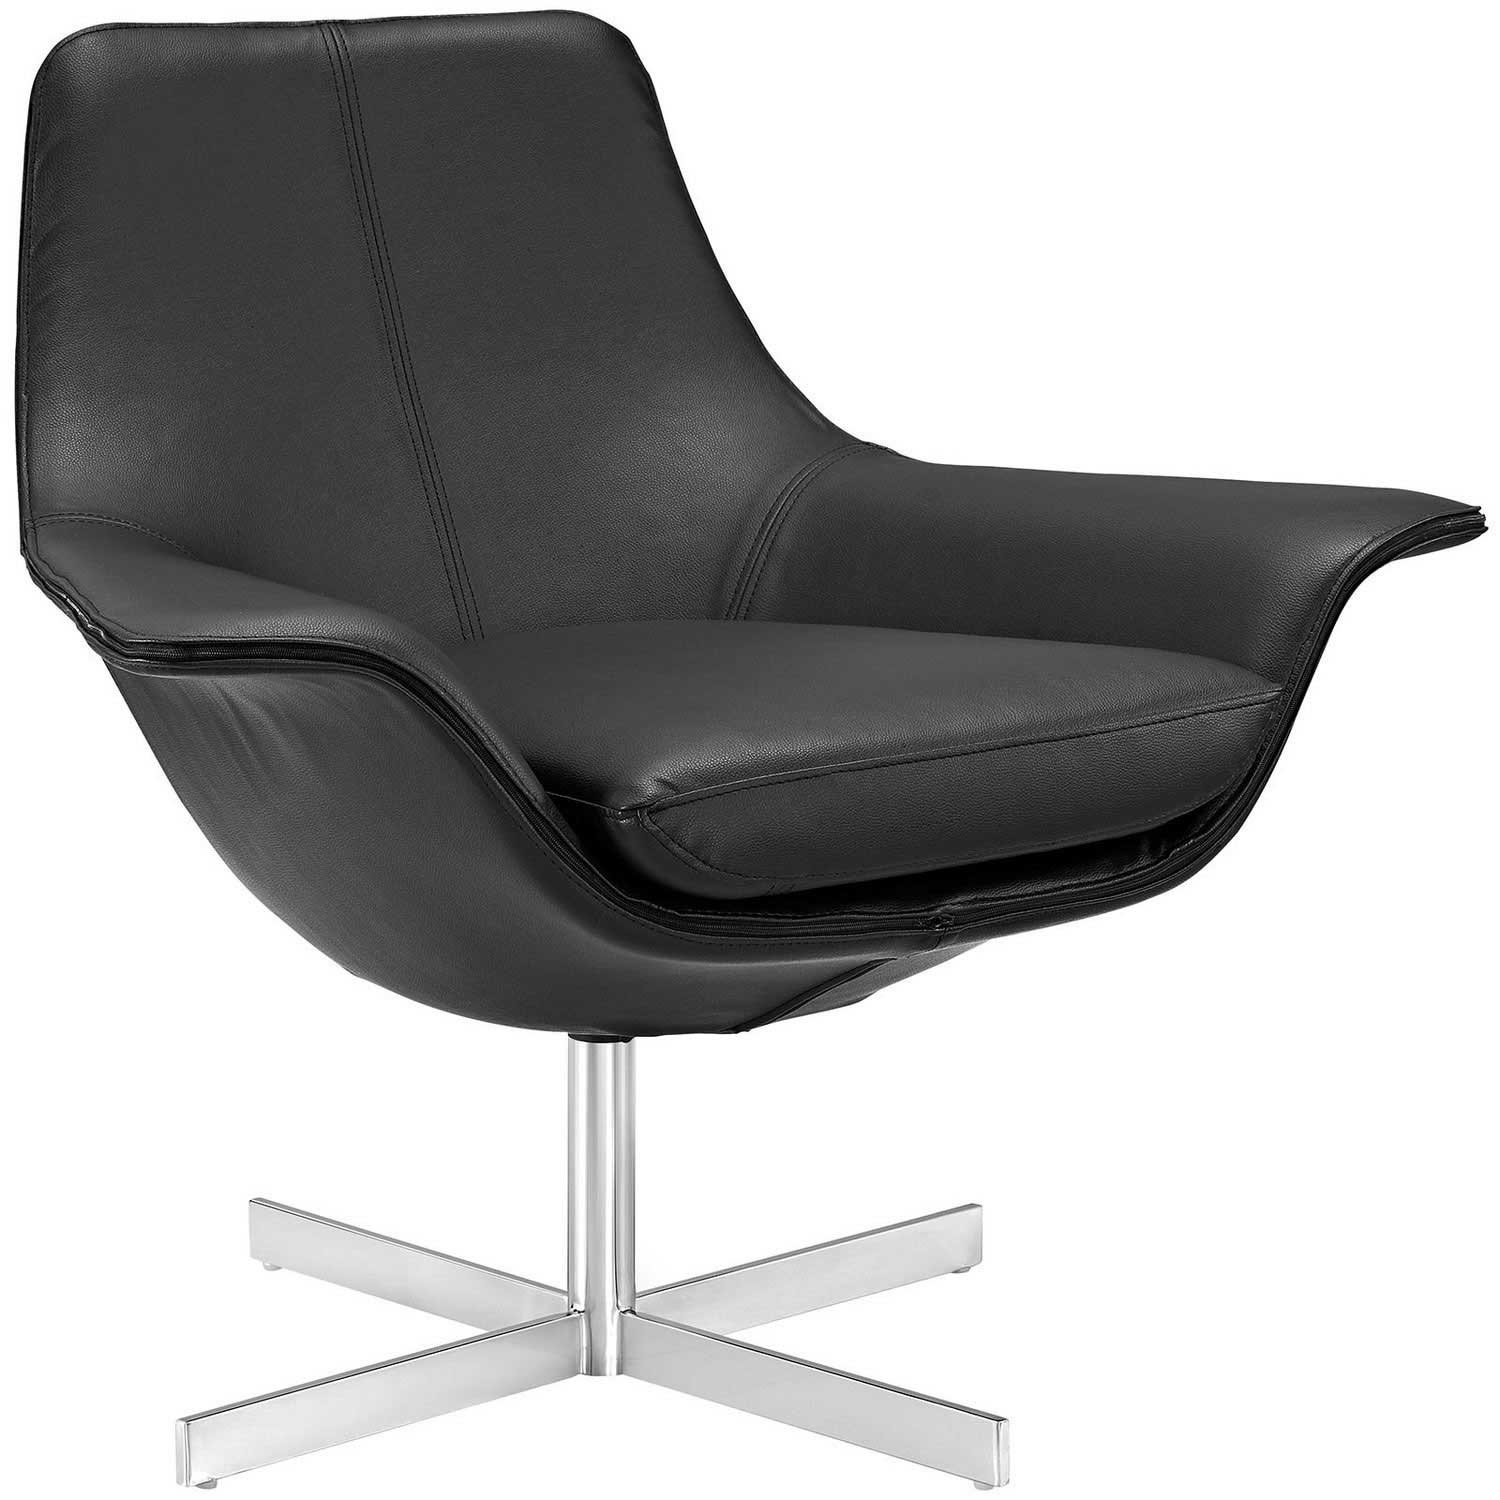 Modway Release Bonded Leather Lounge Chair - Black